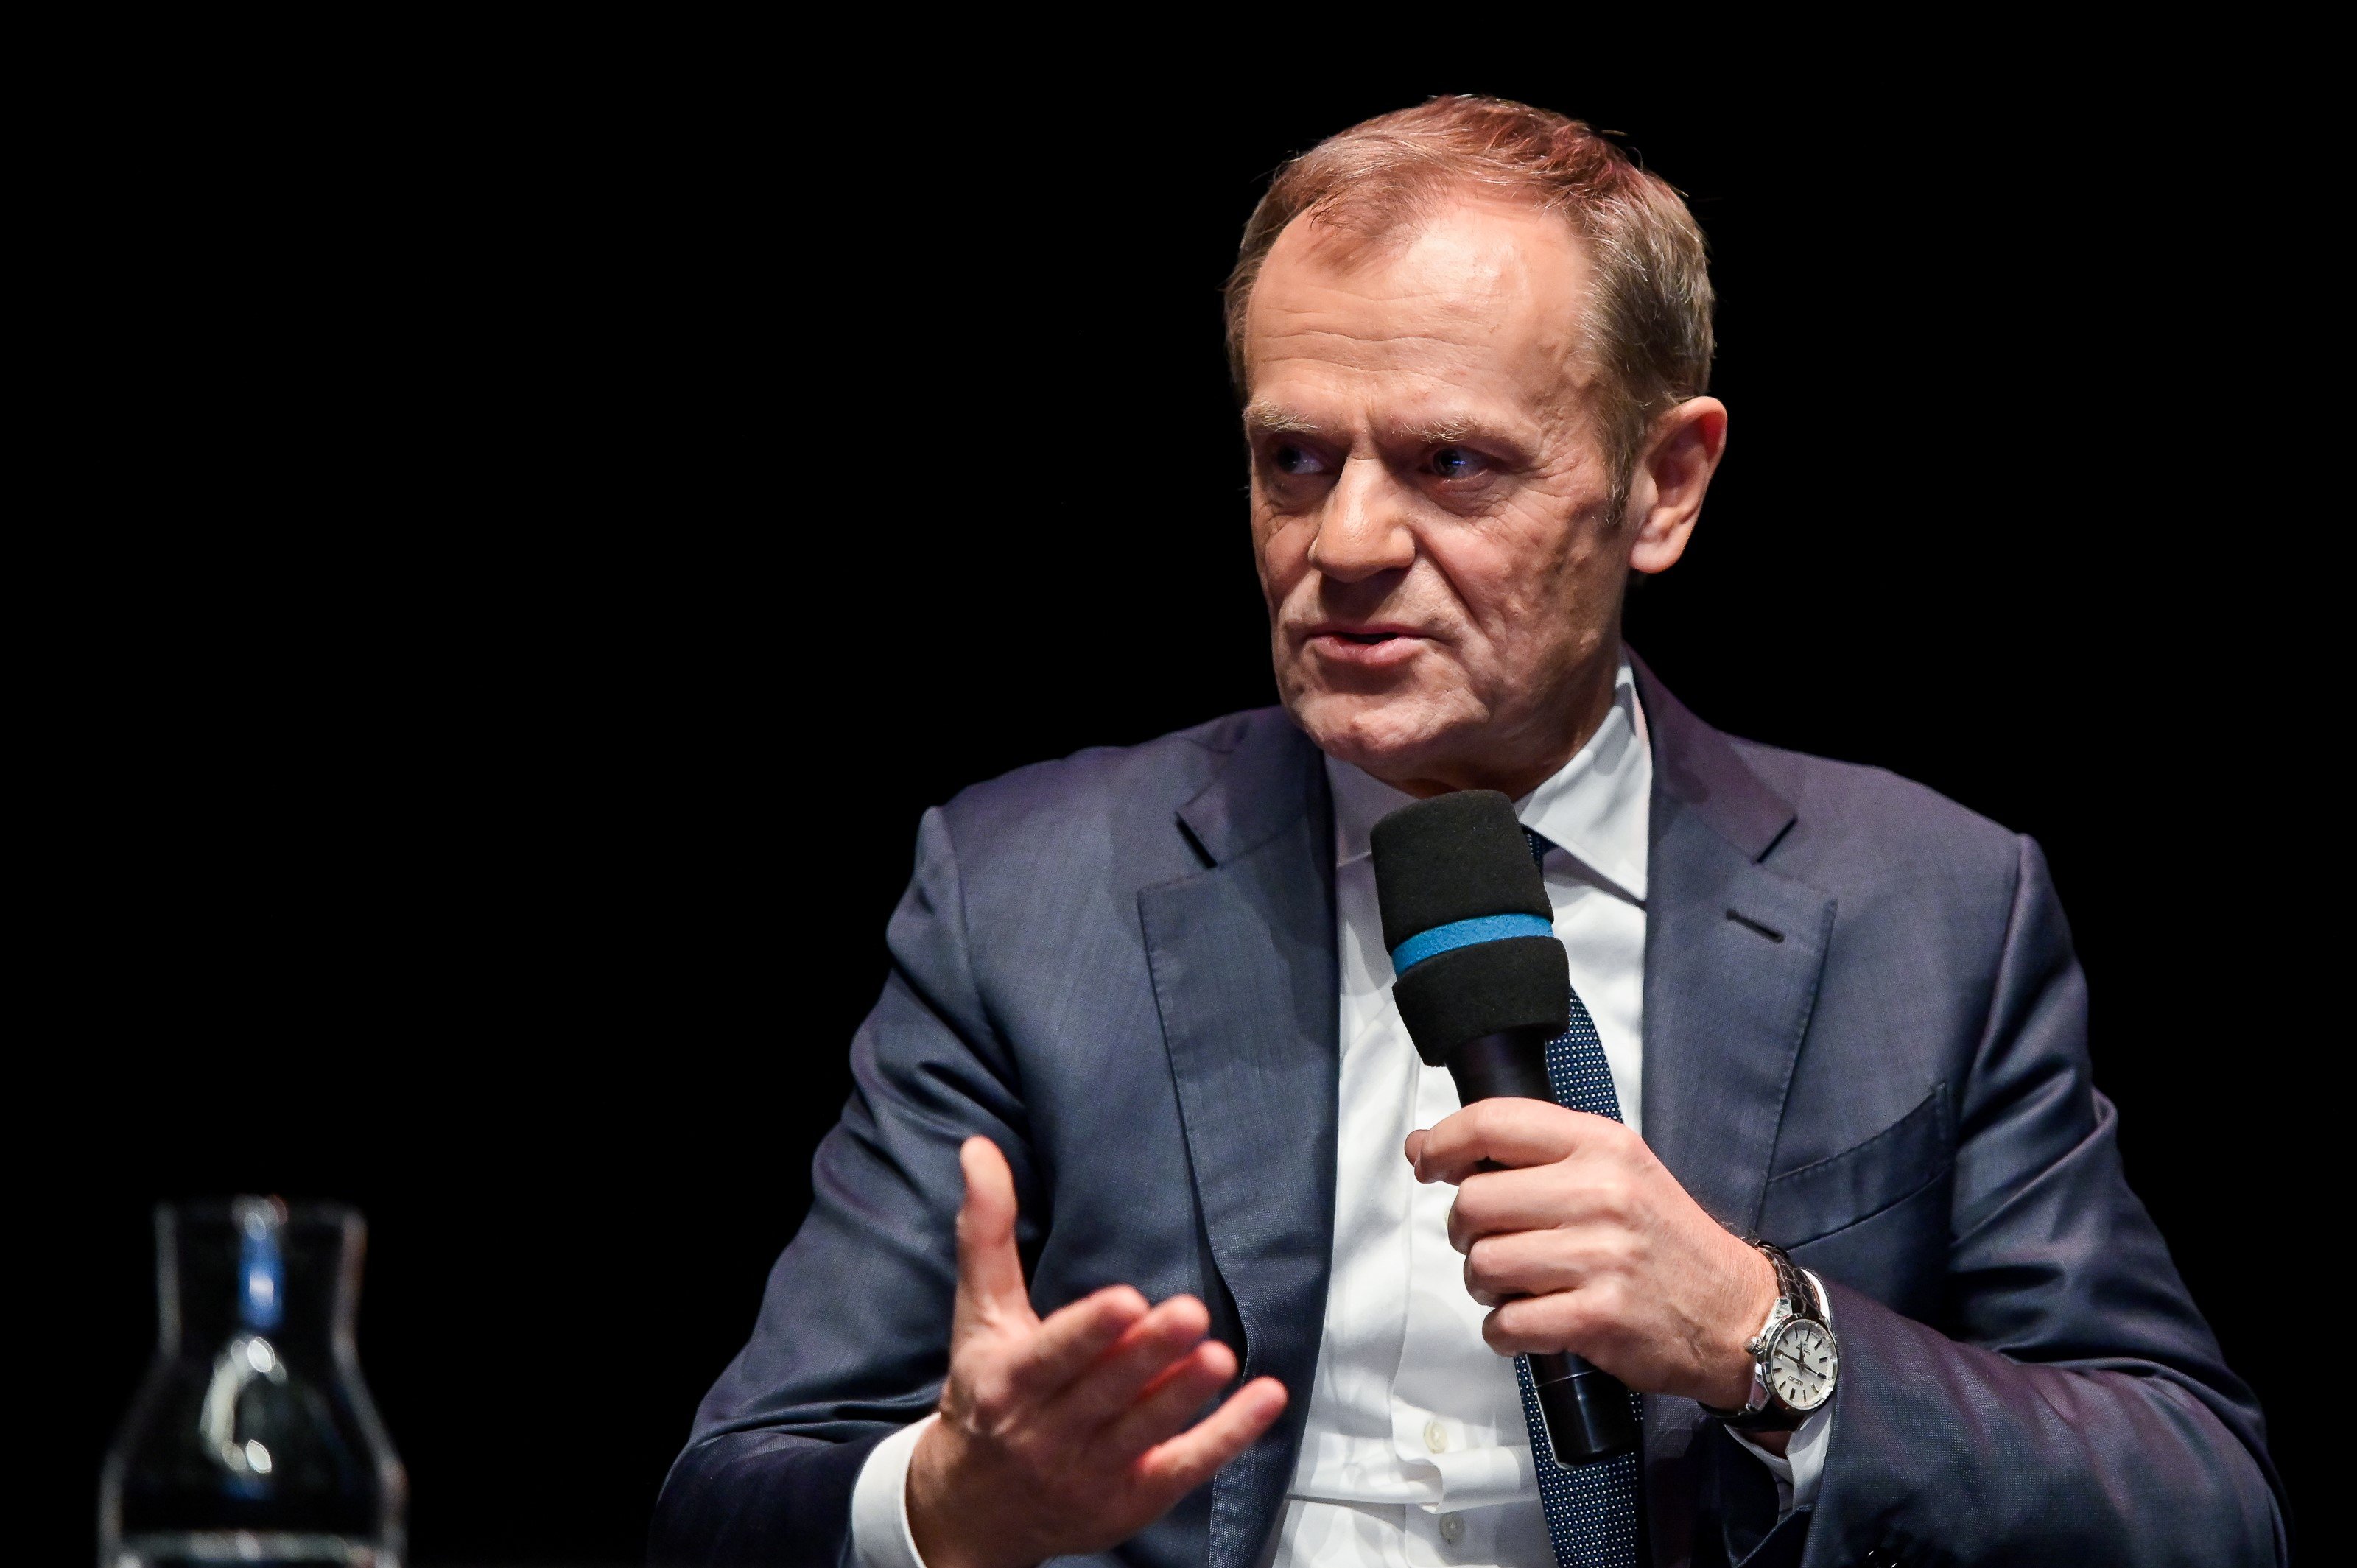 Tusk tells the BBC that he feels "empathy" for an independent Scotland in the EU